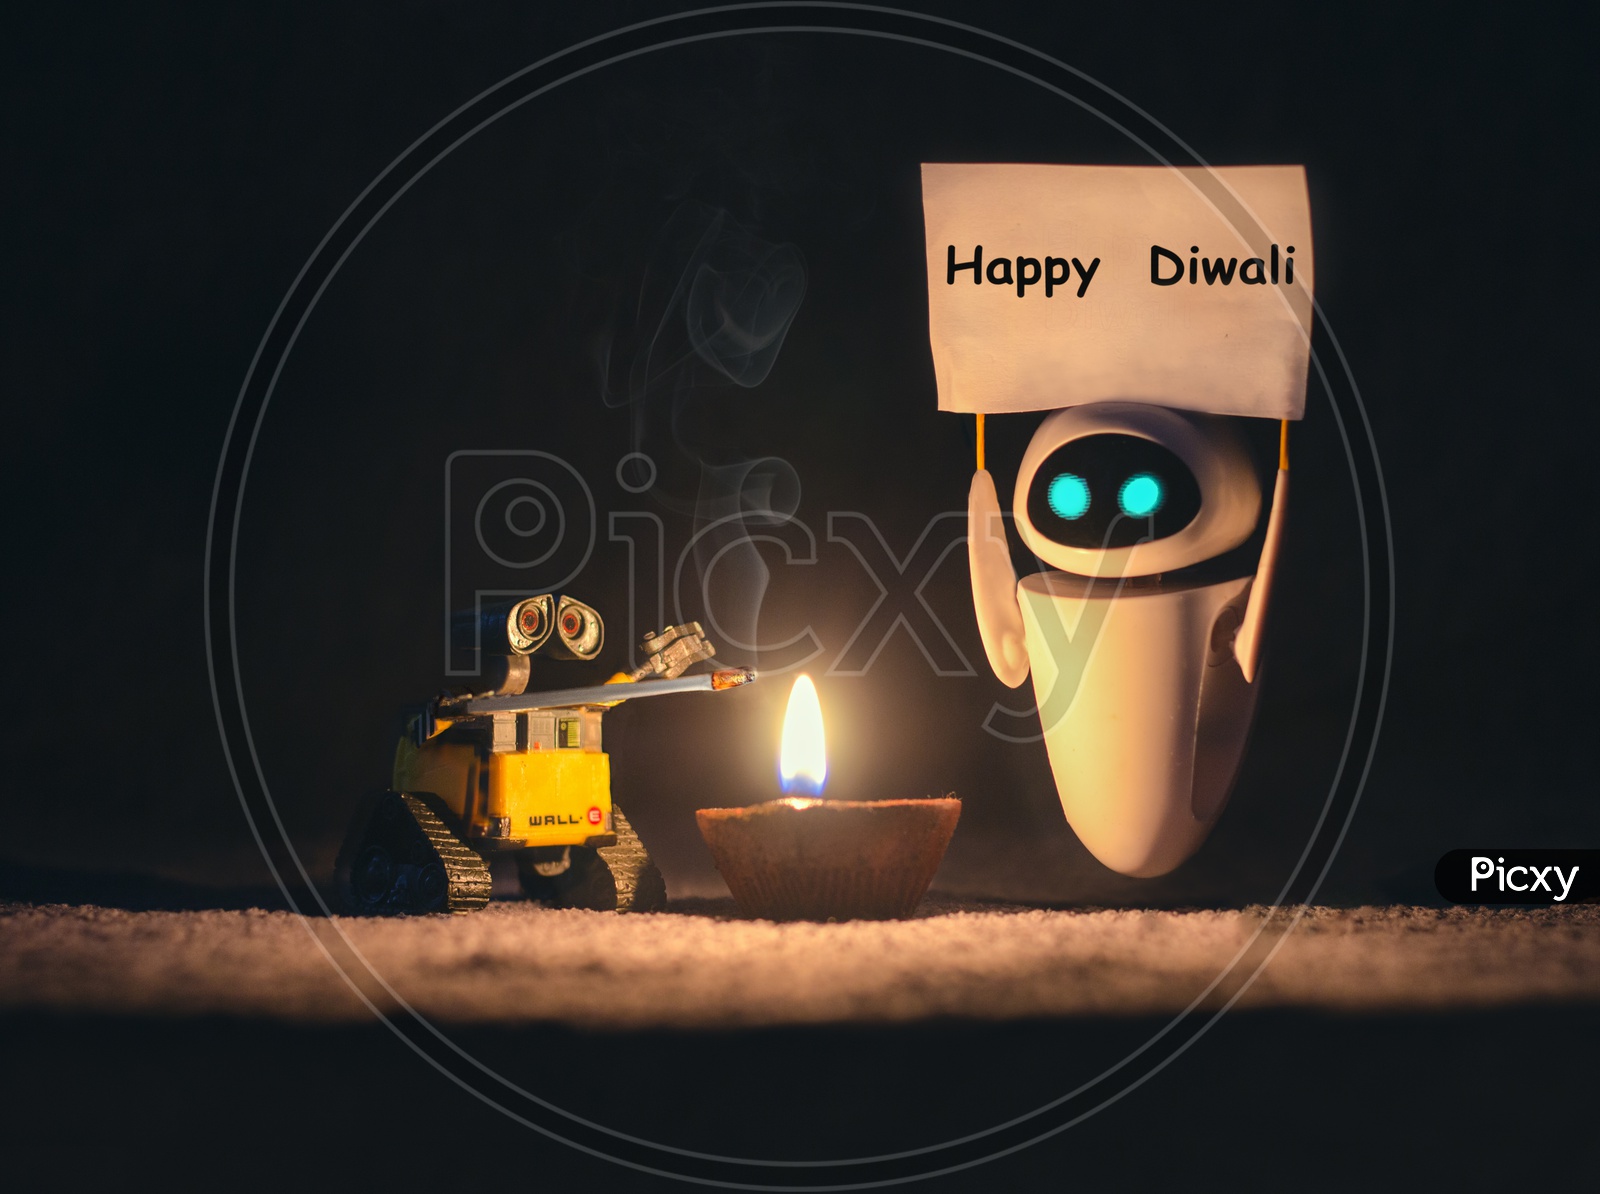 Happy Diwali Wishes Template  Using Diwali Diya  and With Rover and Mini Bot